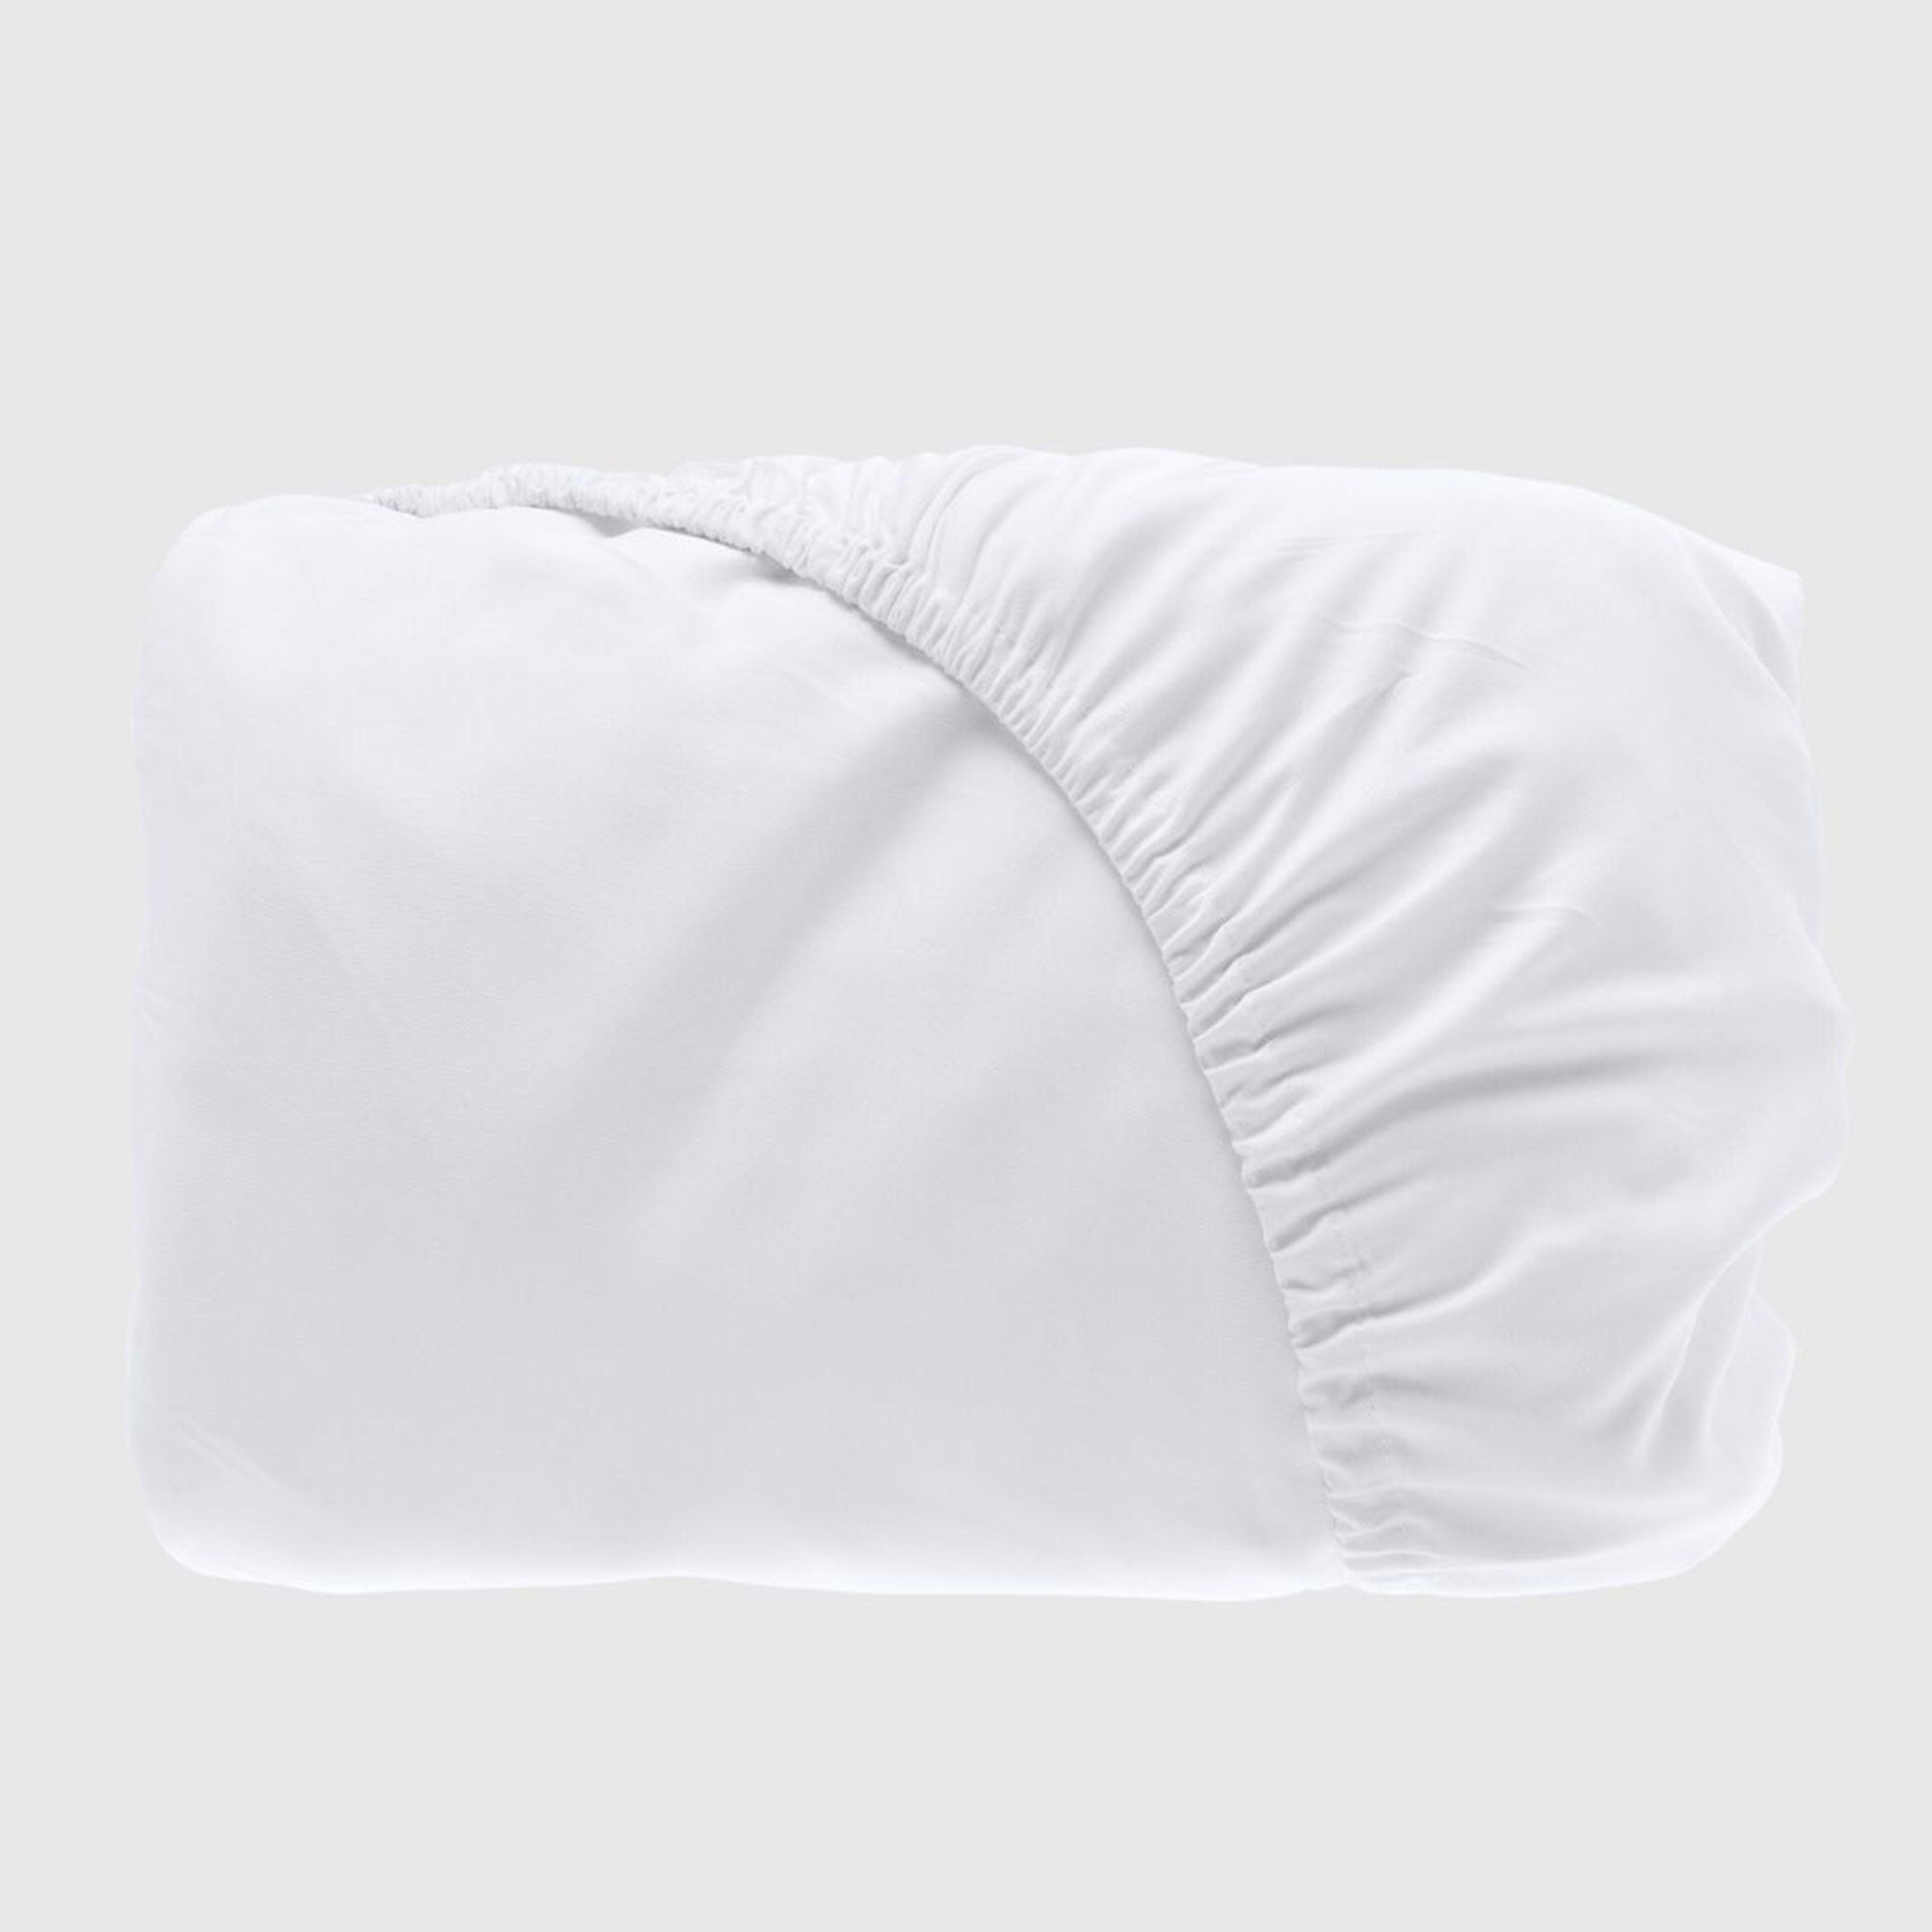 folded white bamboo fitted sheet with fitted elastic showing